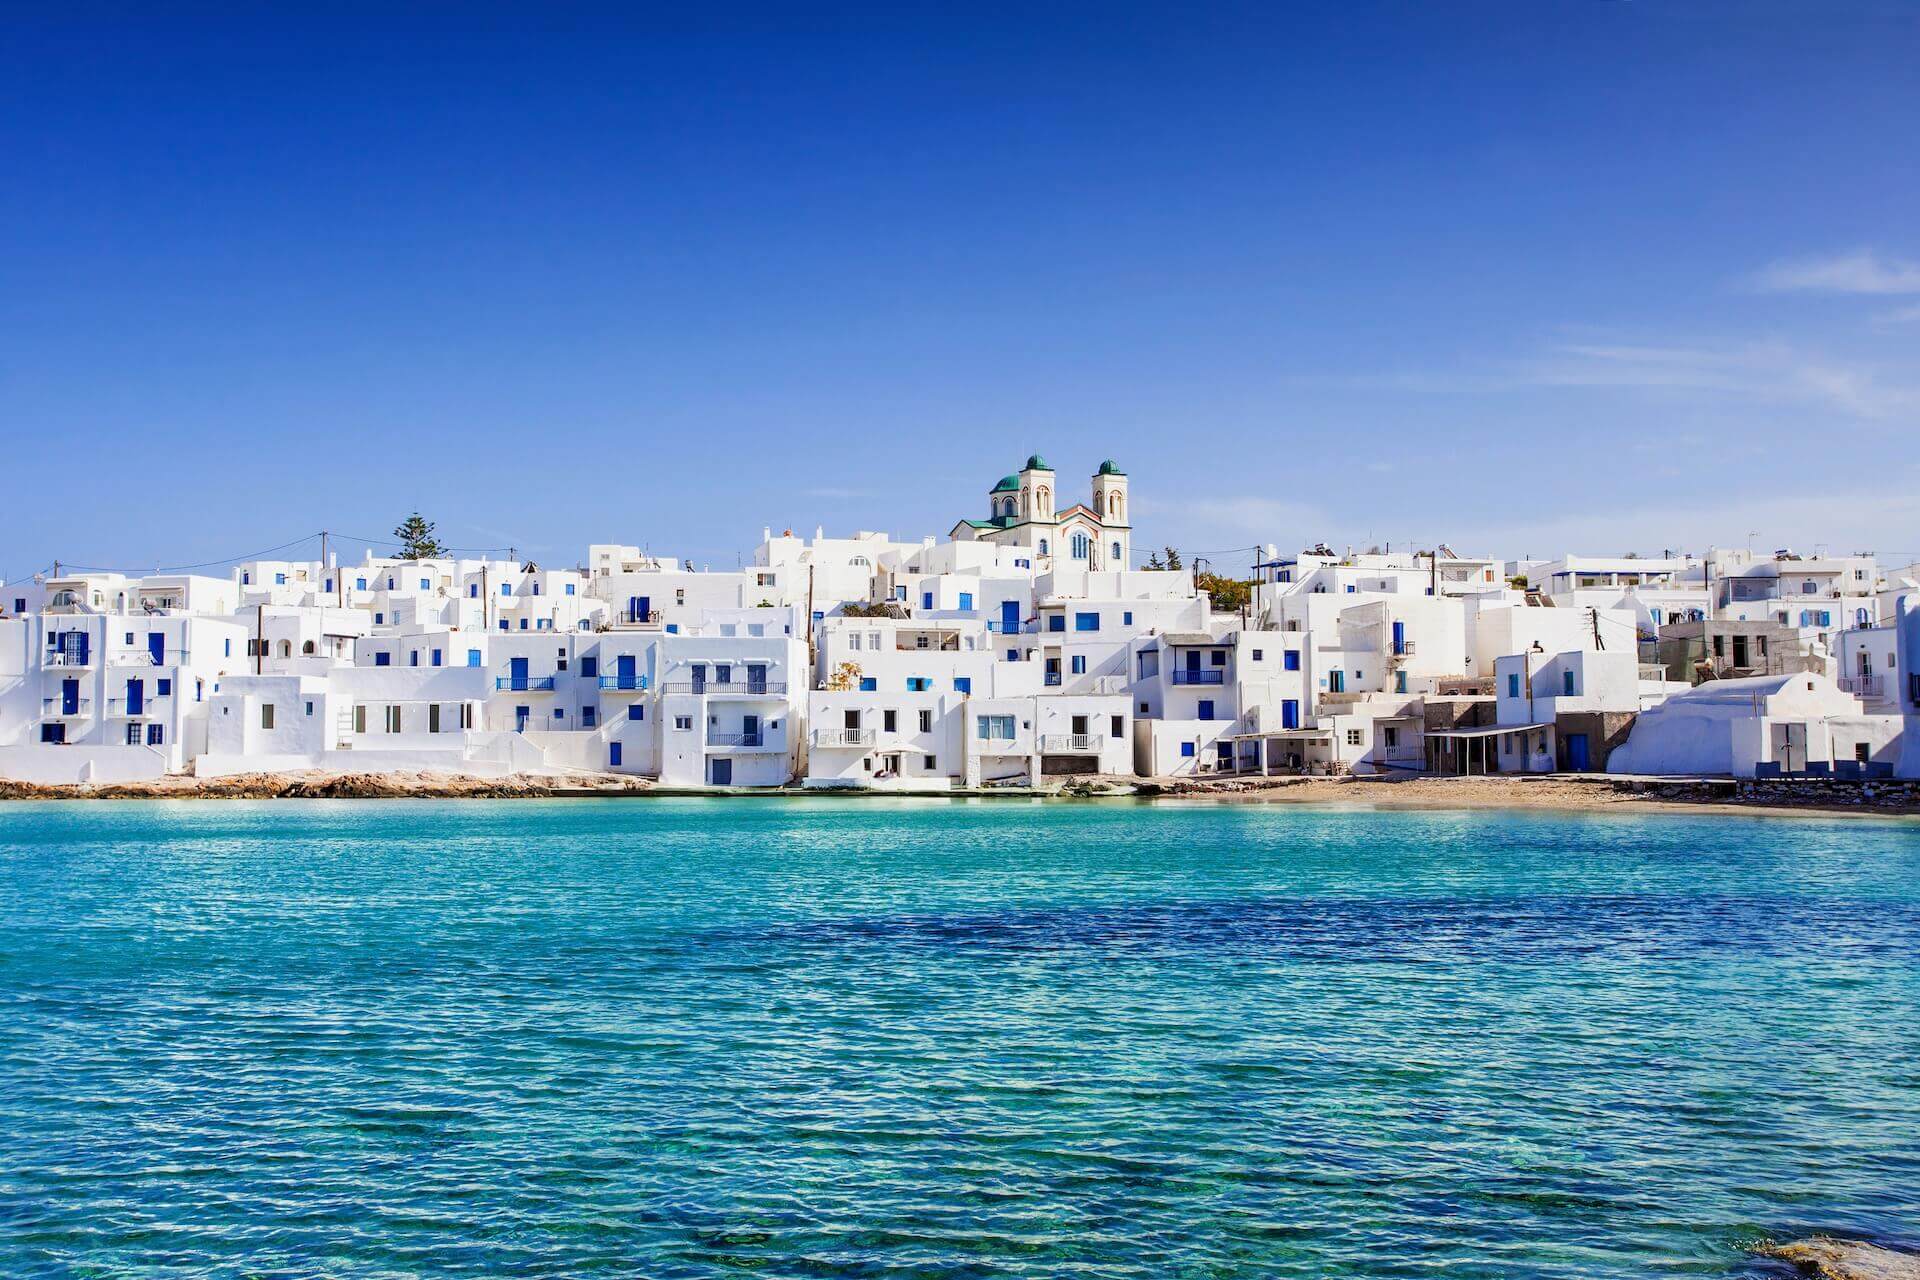 View of Mykonos town from the sea